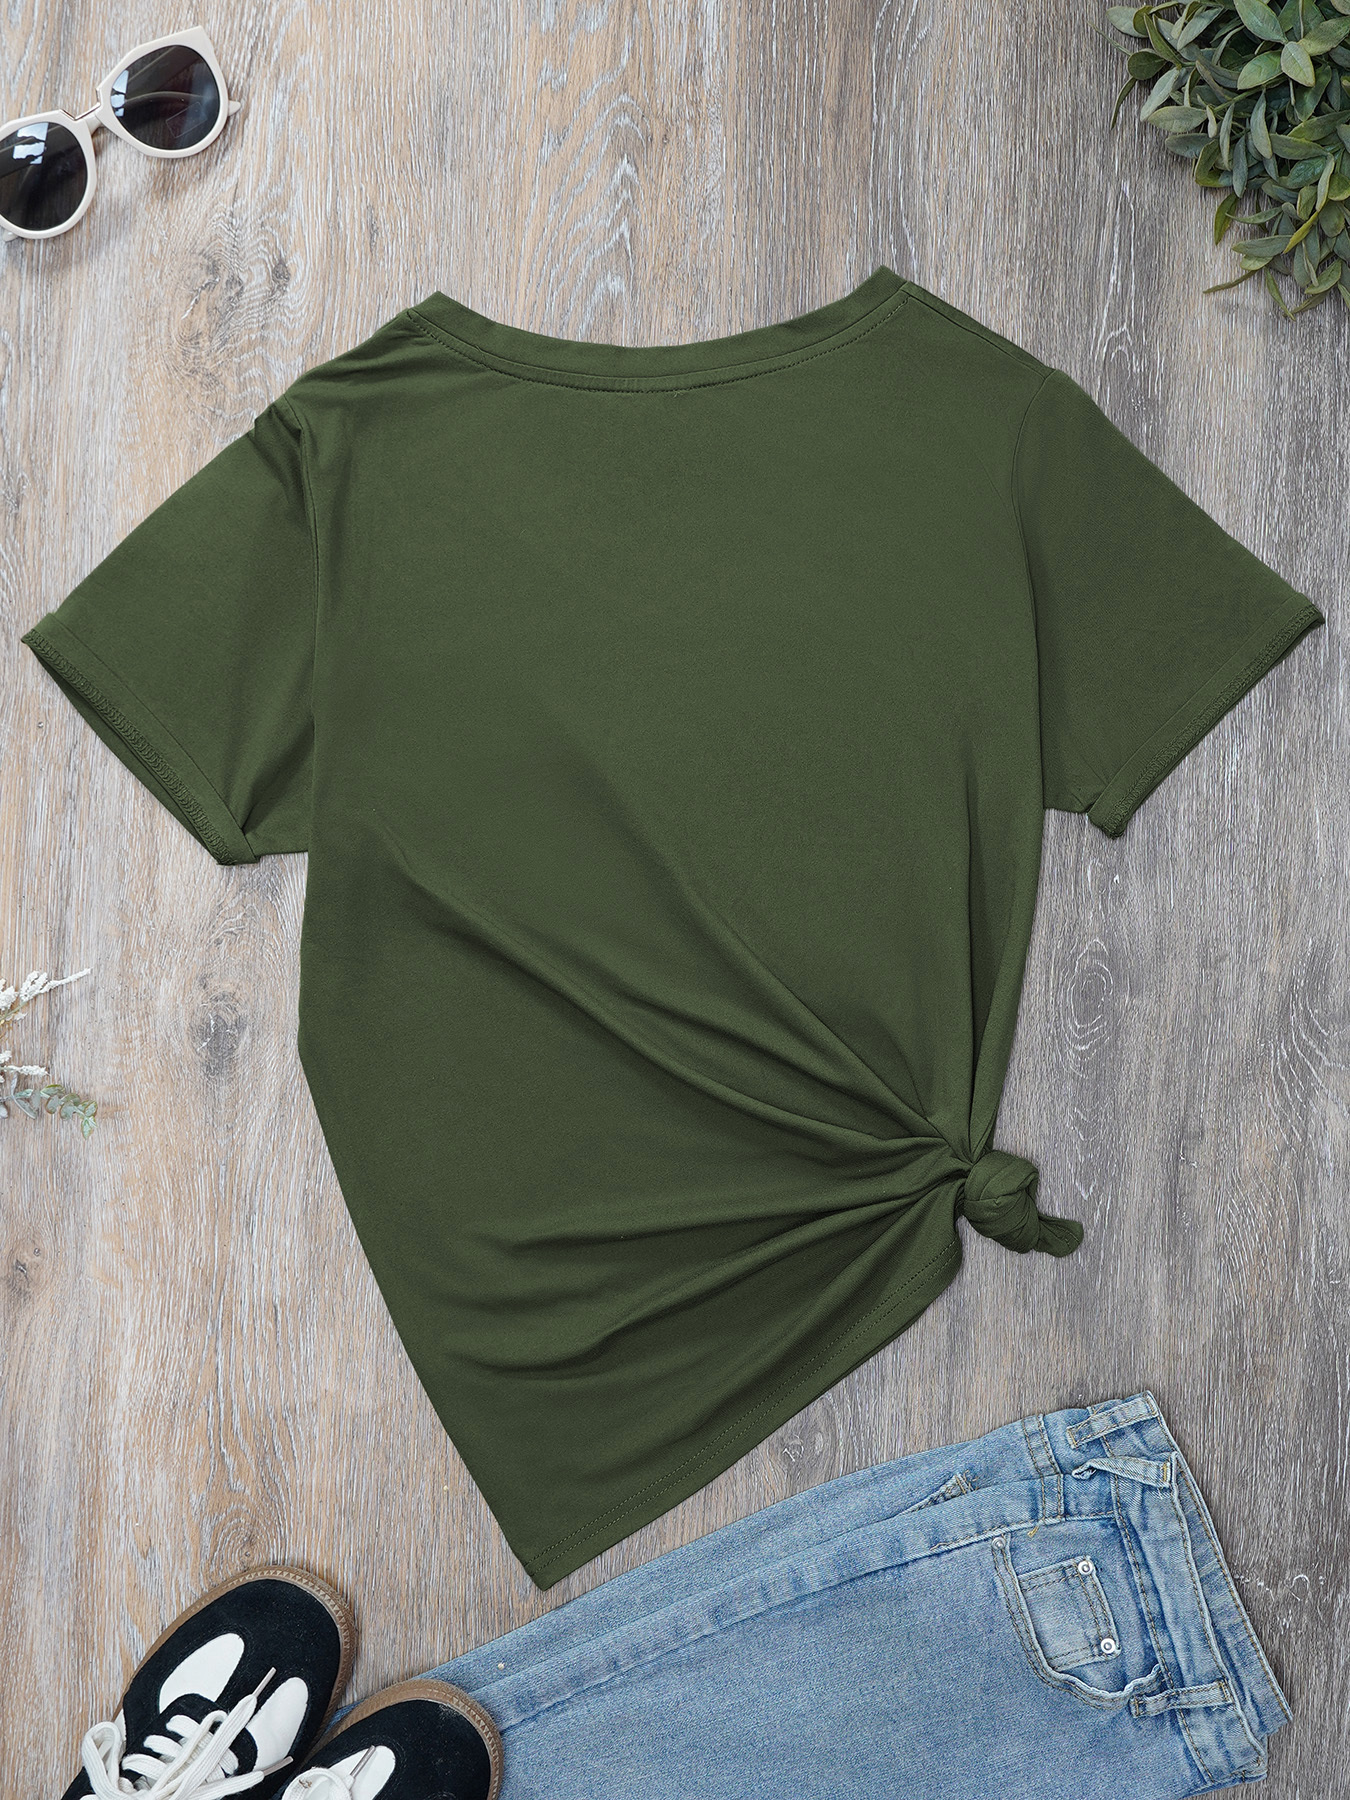 drink letter print casual t shirt v neck short sleeves stretchy sports tee st patricks day womens comfy tops details 4